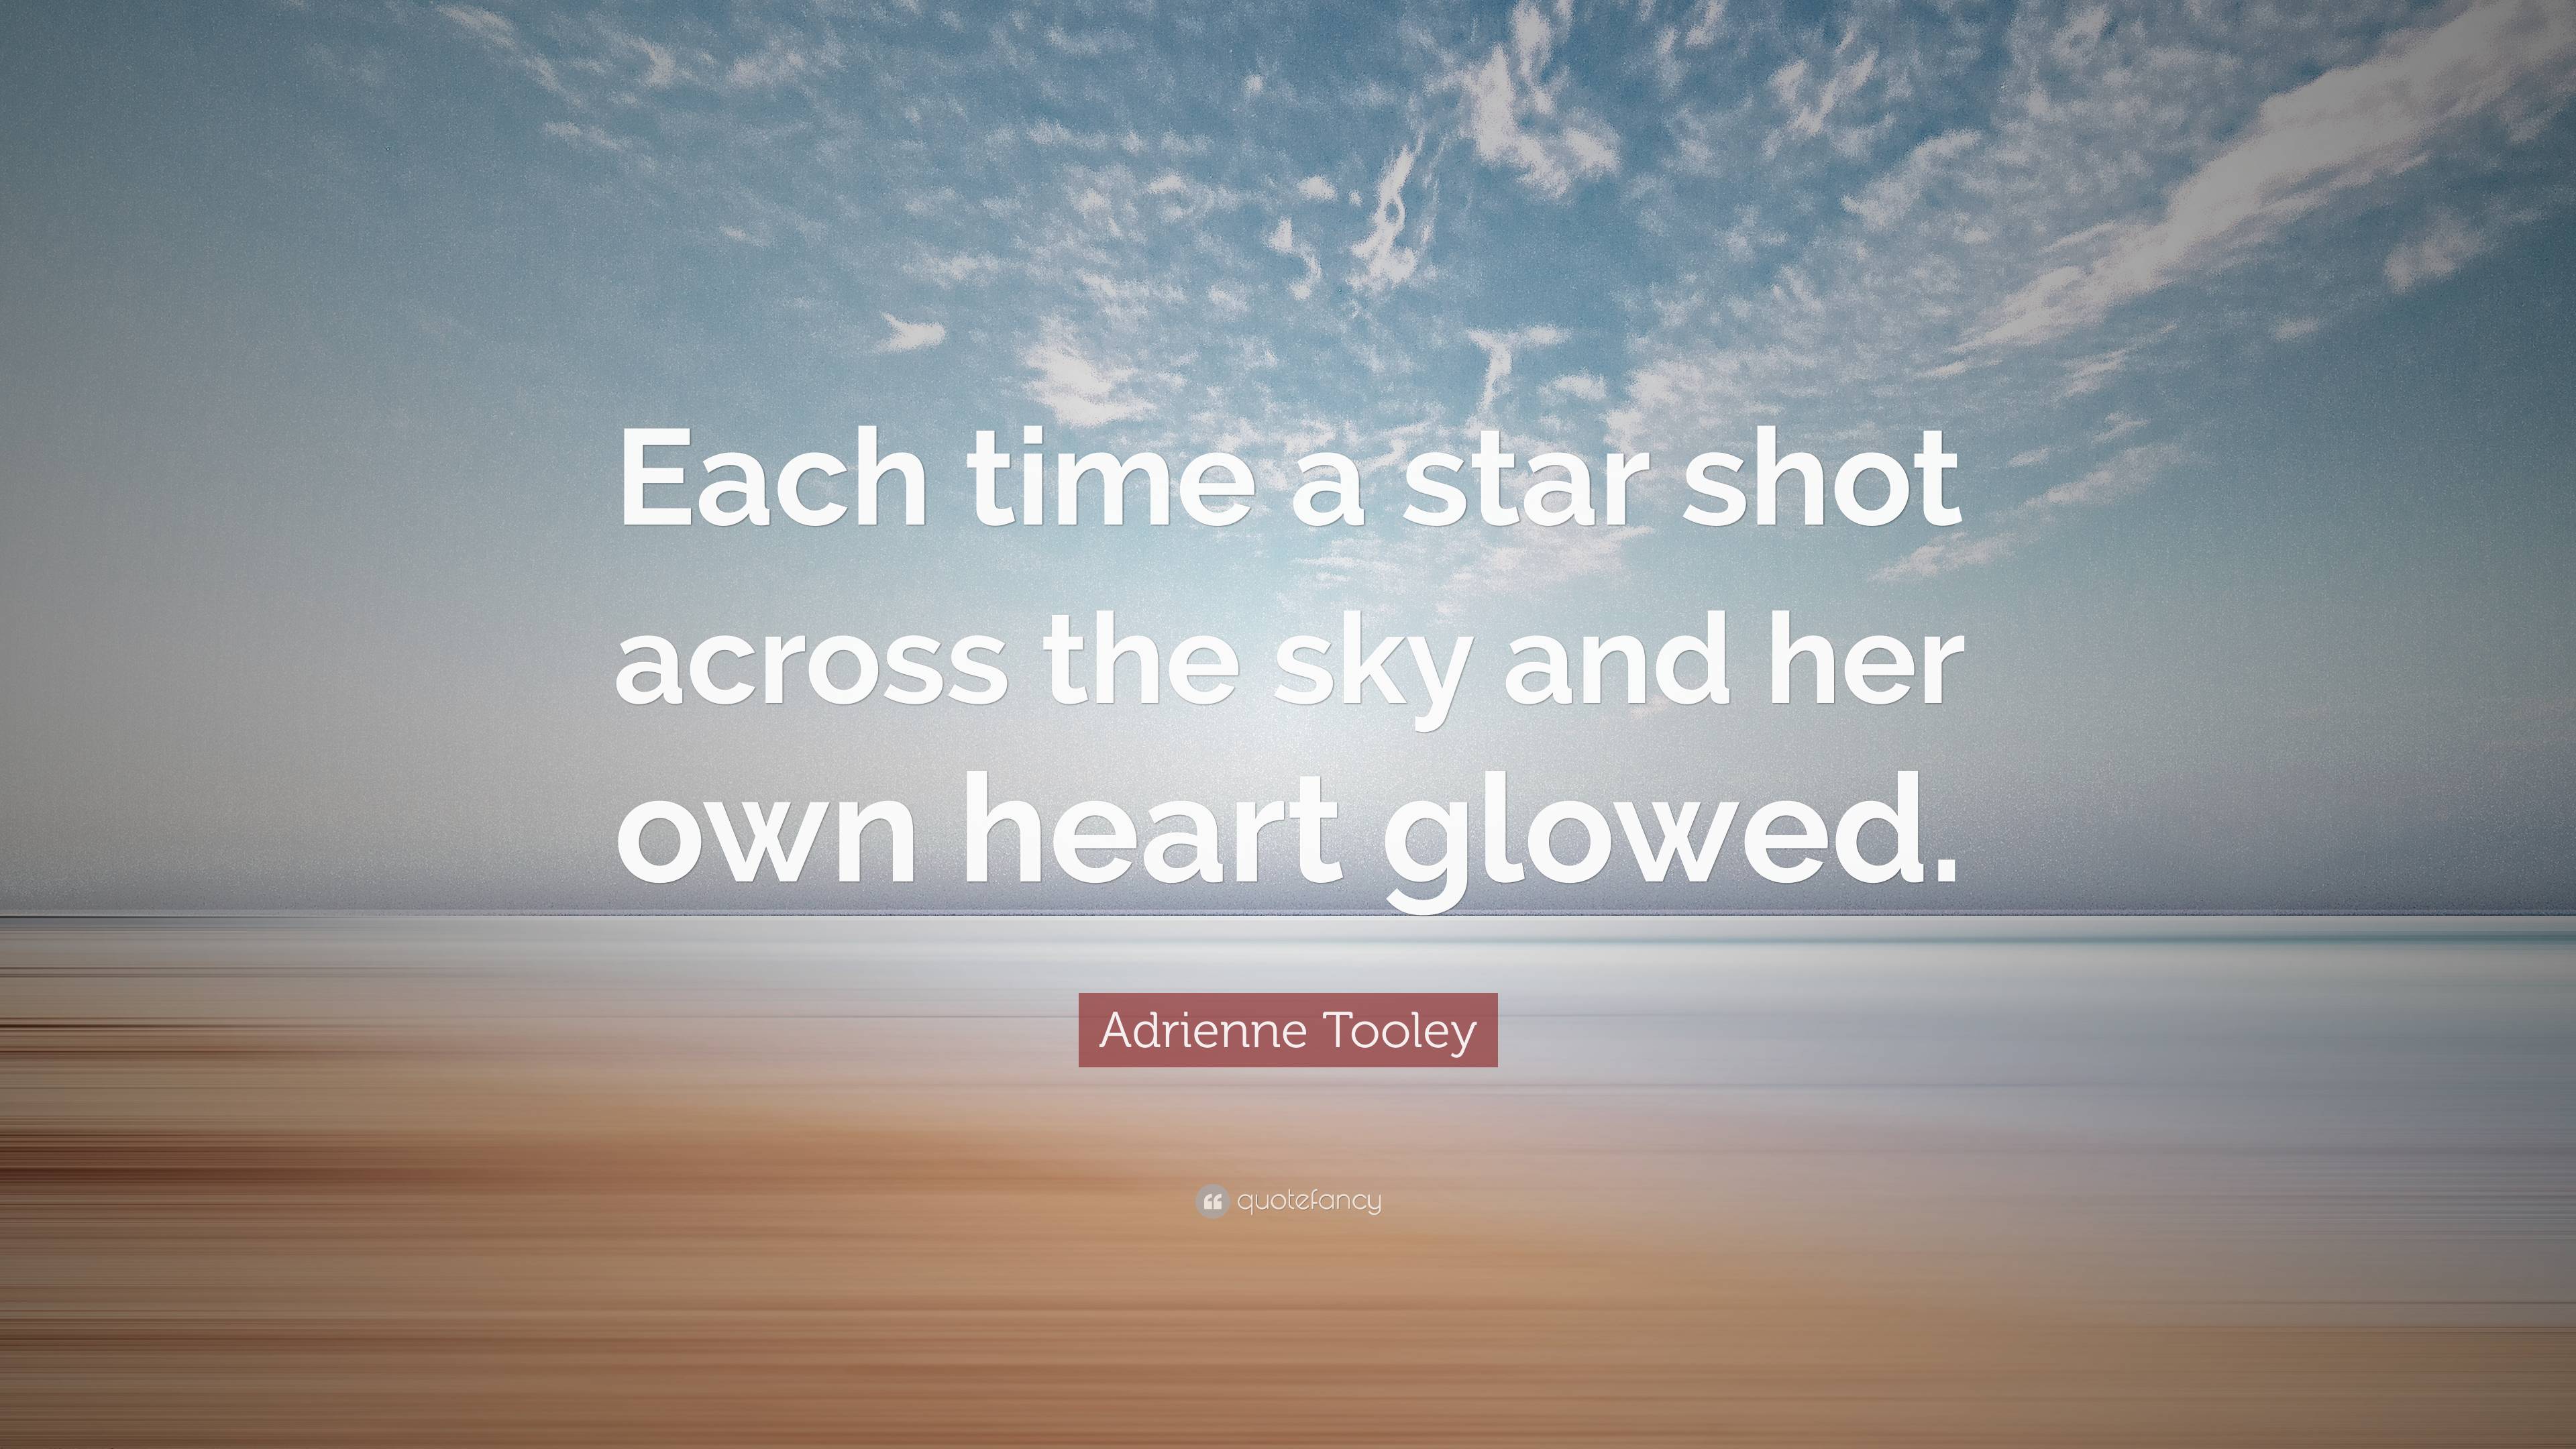 Adrienne Tooley Quote: “Each time a star shot across the sky and her own  heart glowed.”